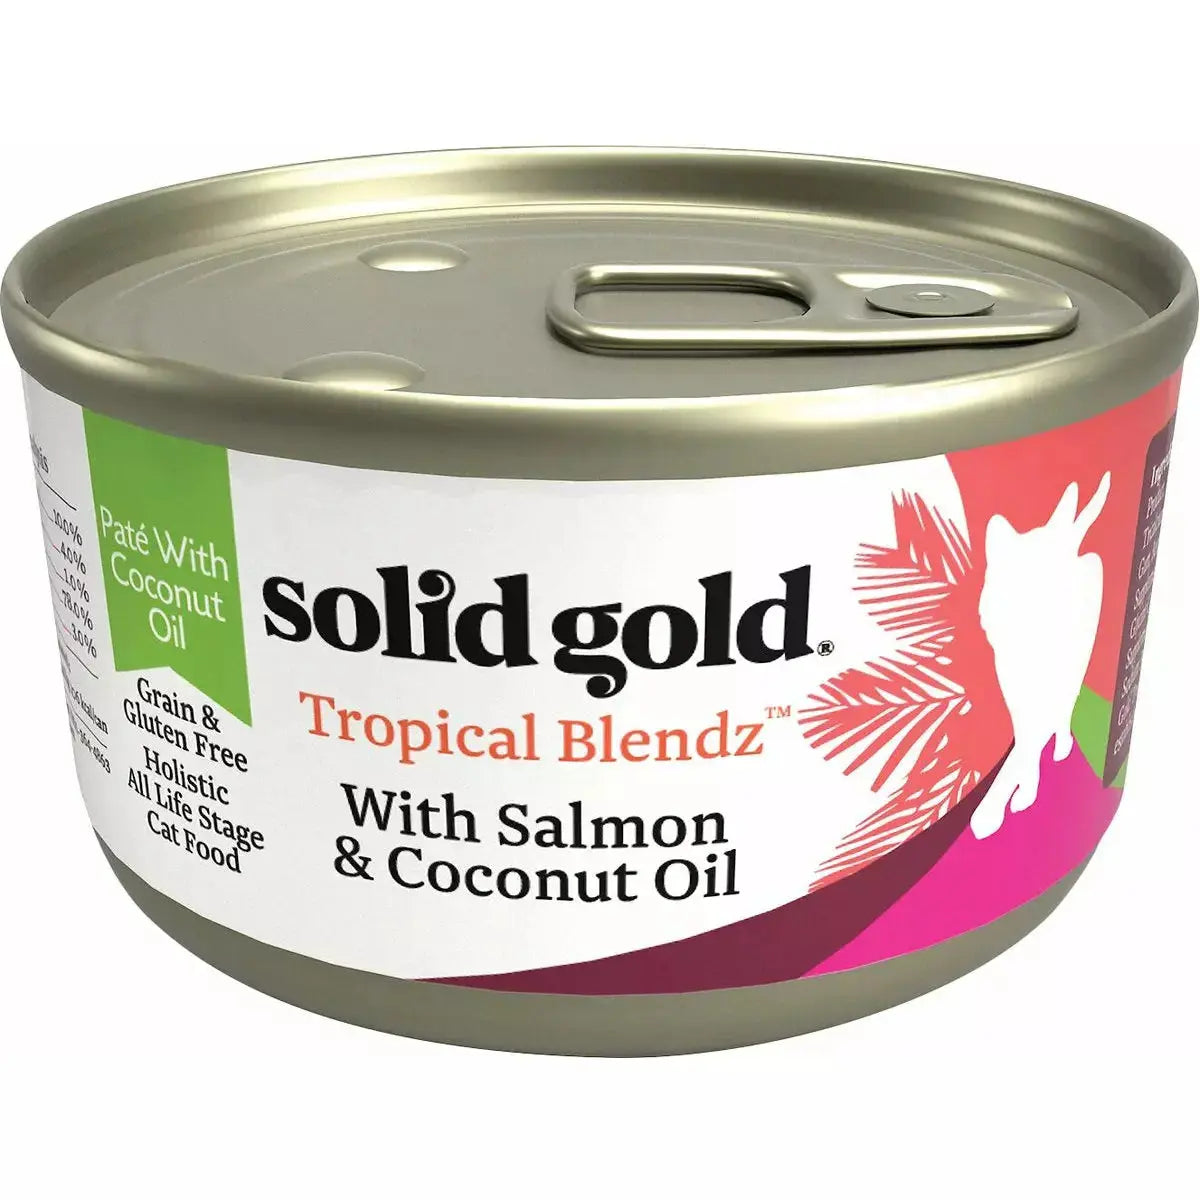 Solid Gold® Tropical Blendz Grain Free Salmon & Coconut Oil Pate Cat Food Solid Gold